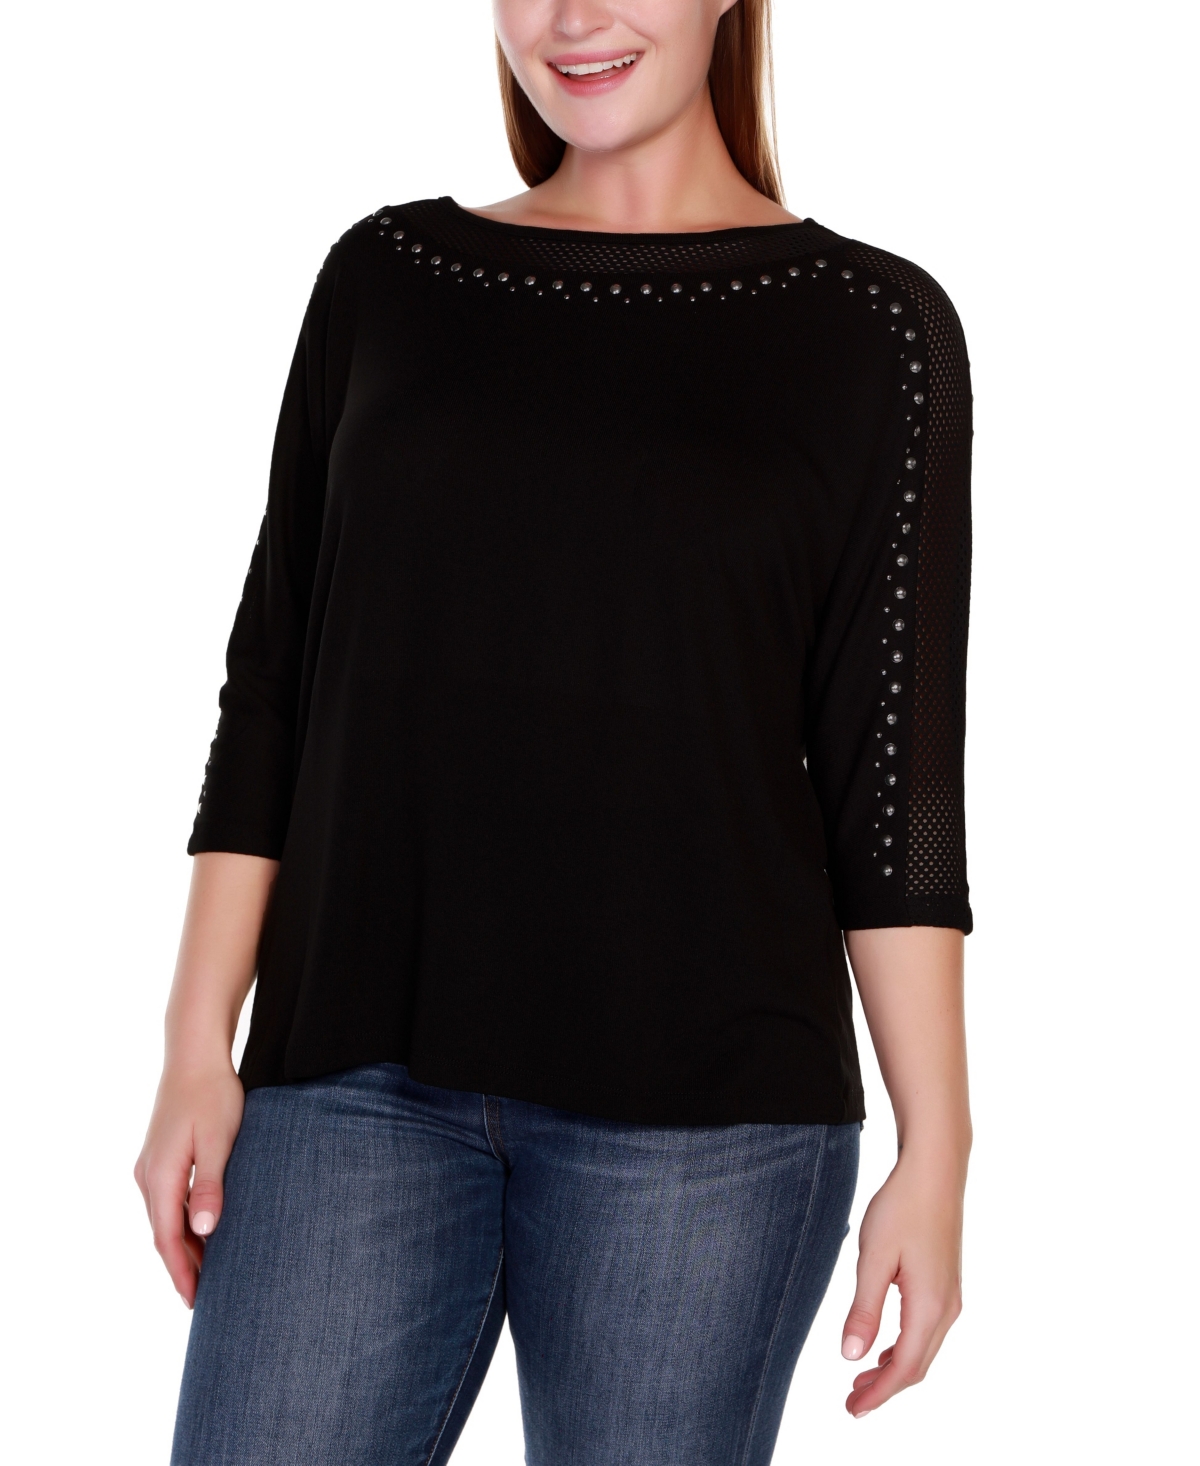 Plus Size Embellished Dolman with Mesh Inset Top - Black